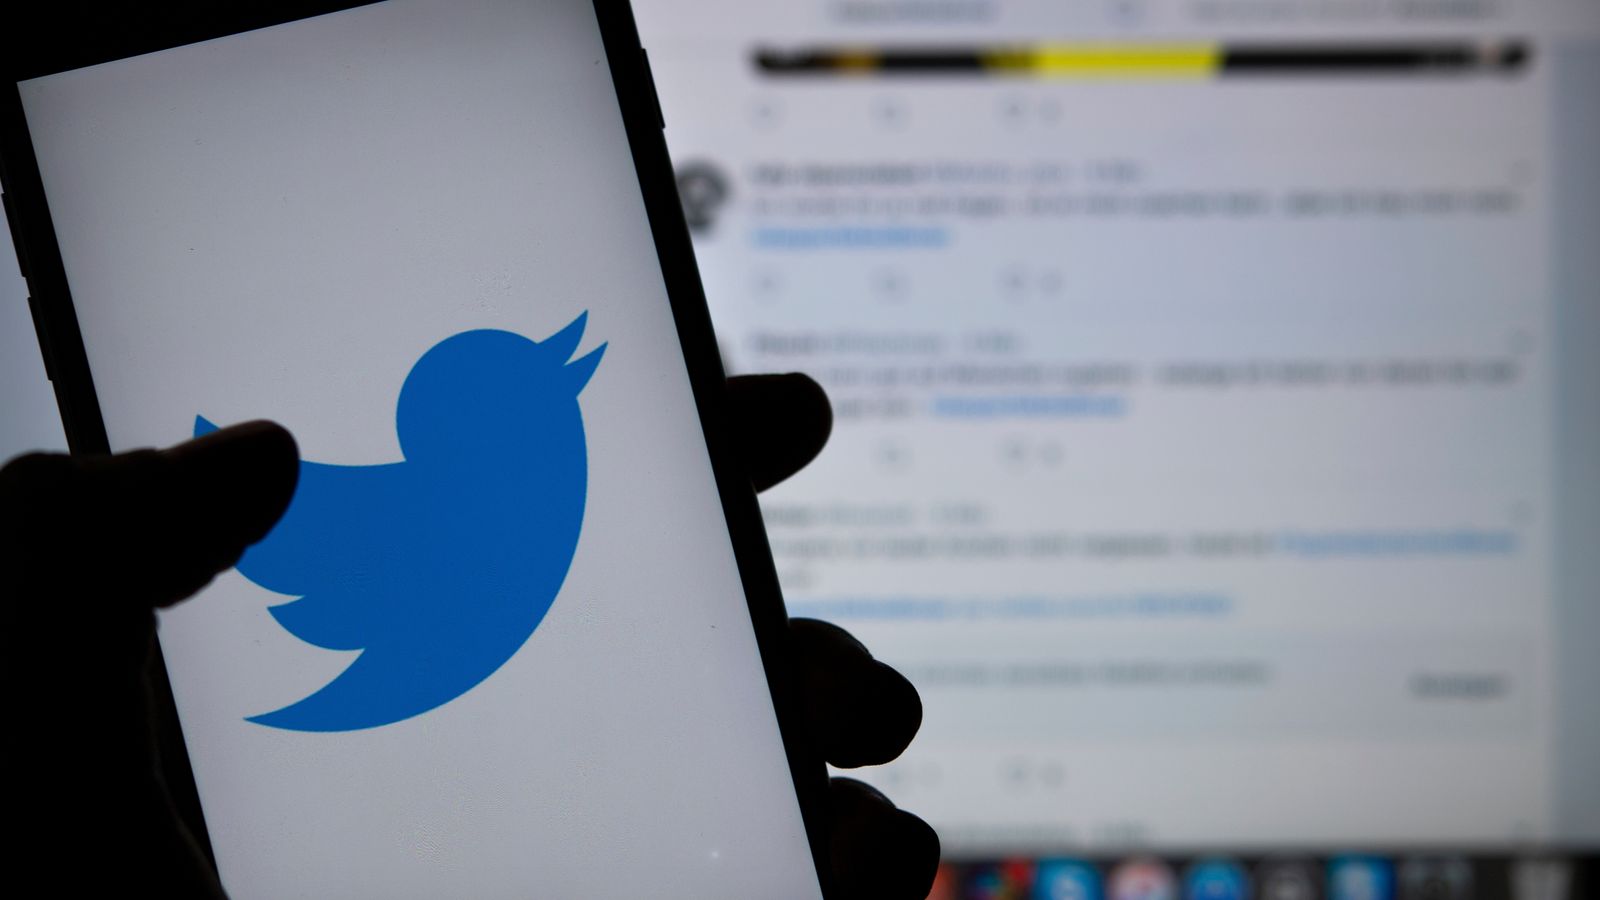 Twitter to redesign new redesign after headache complaints